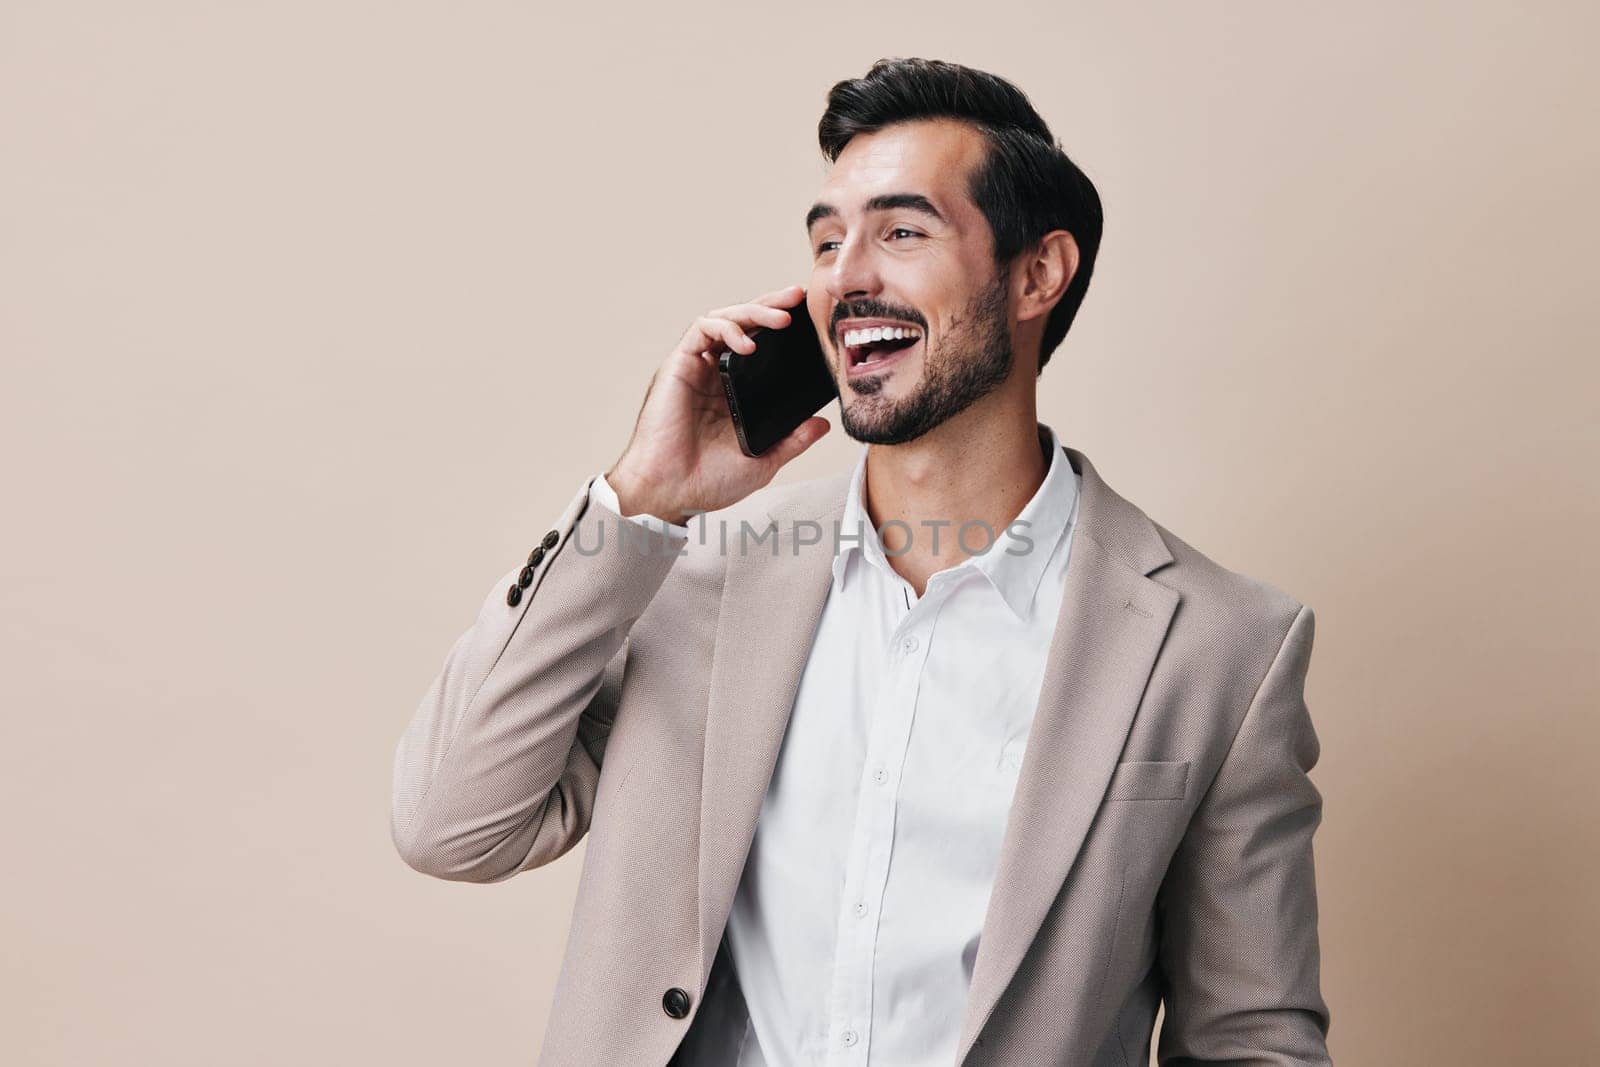 phone man suit smartphone hold smile mobile call application phone holding app internet mobile happy person selfies beige portrait business trading beard